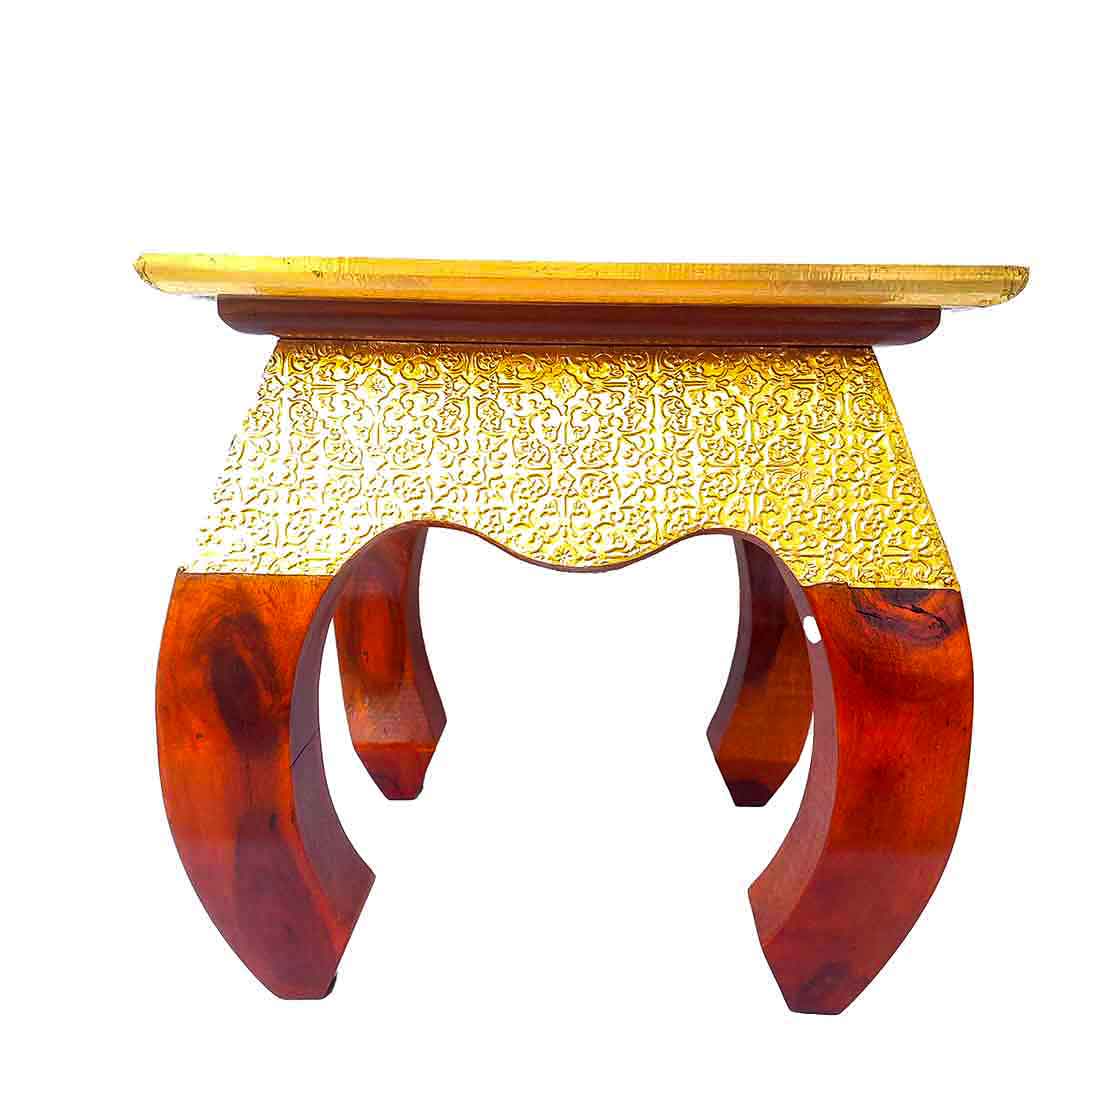 Brass Embellished | Wood Coffee Table | End Tables for Living Room - 14 Inches - ApkaMart